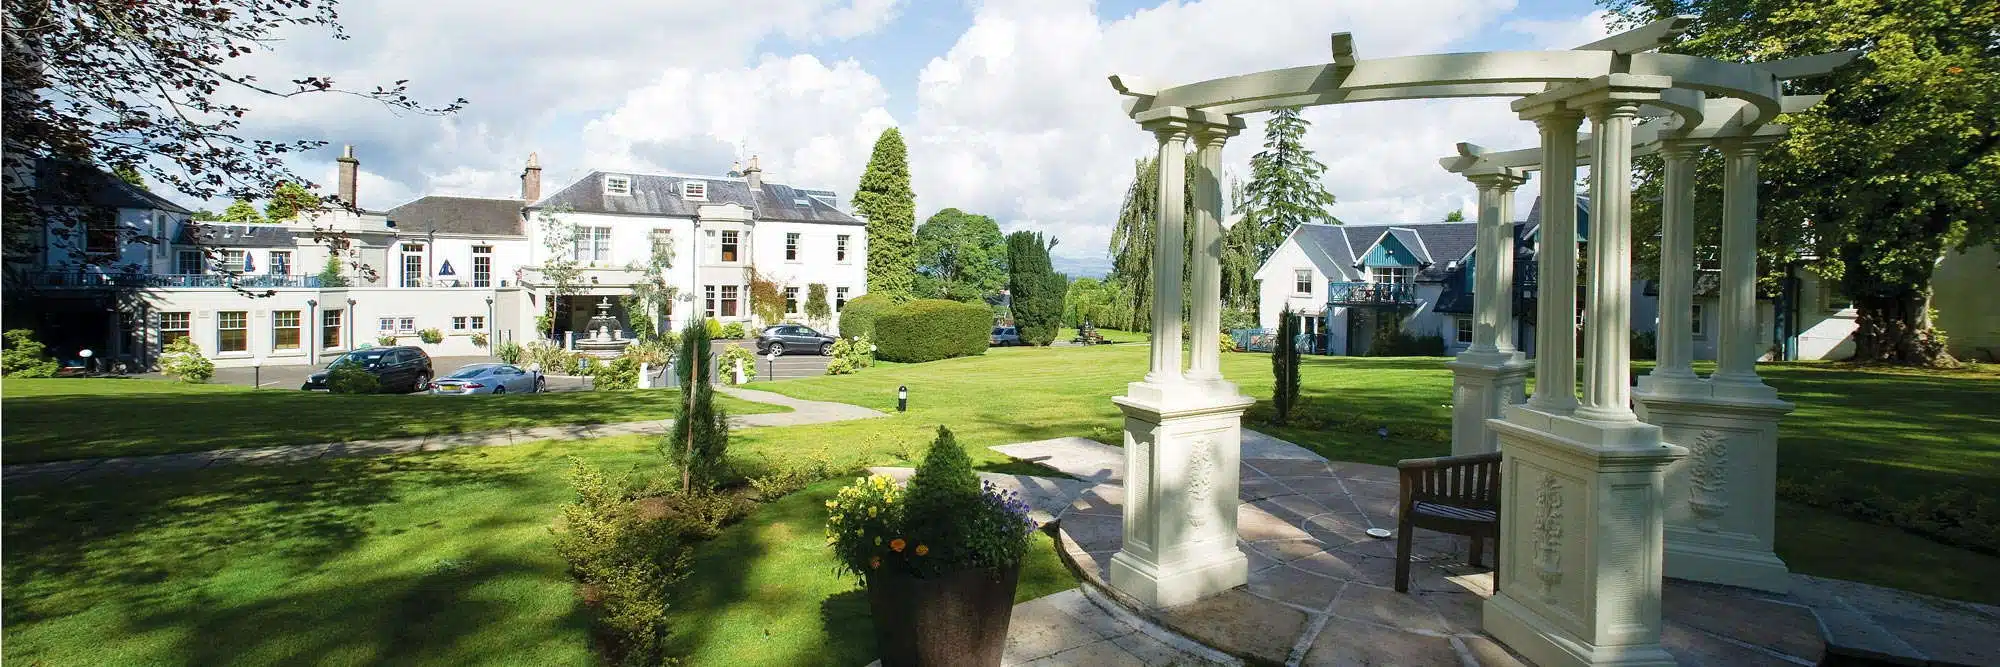 CLC Duchally Country Estate is considered one of the best hotels in Scotland